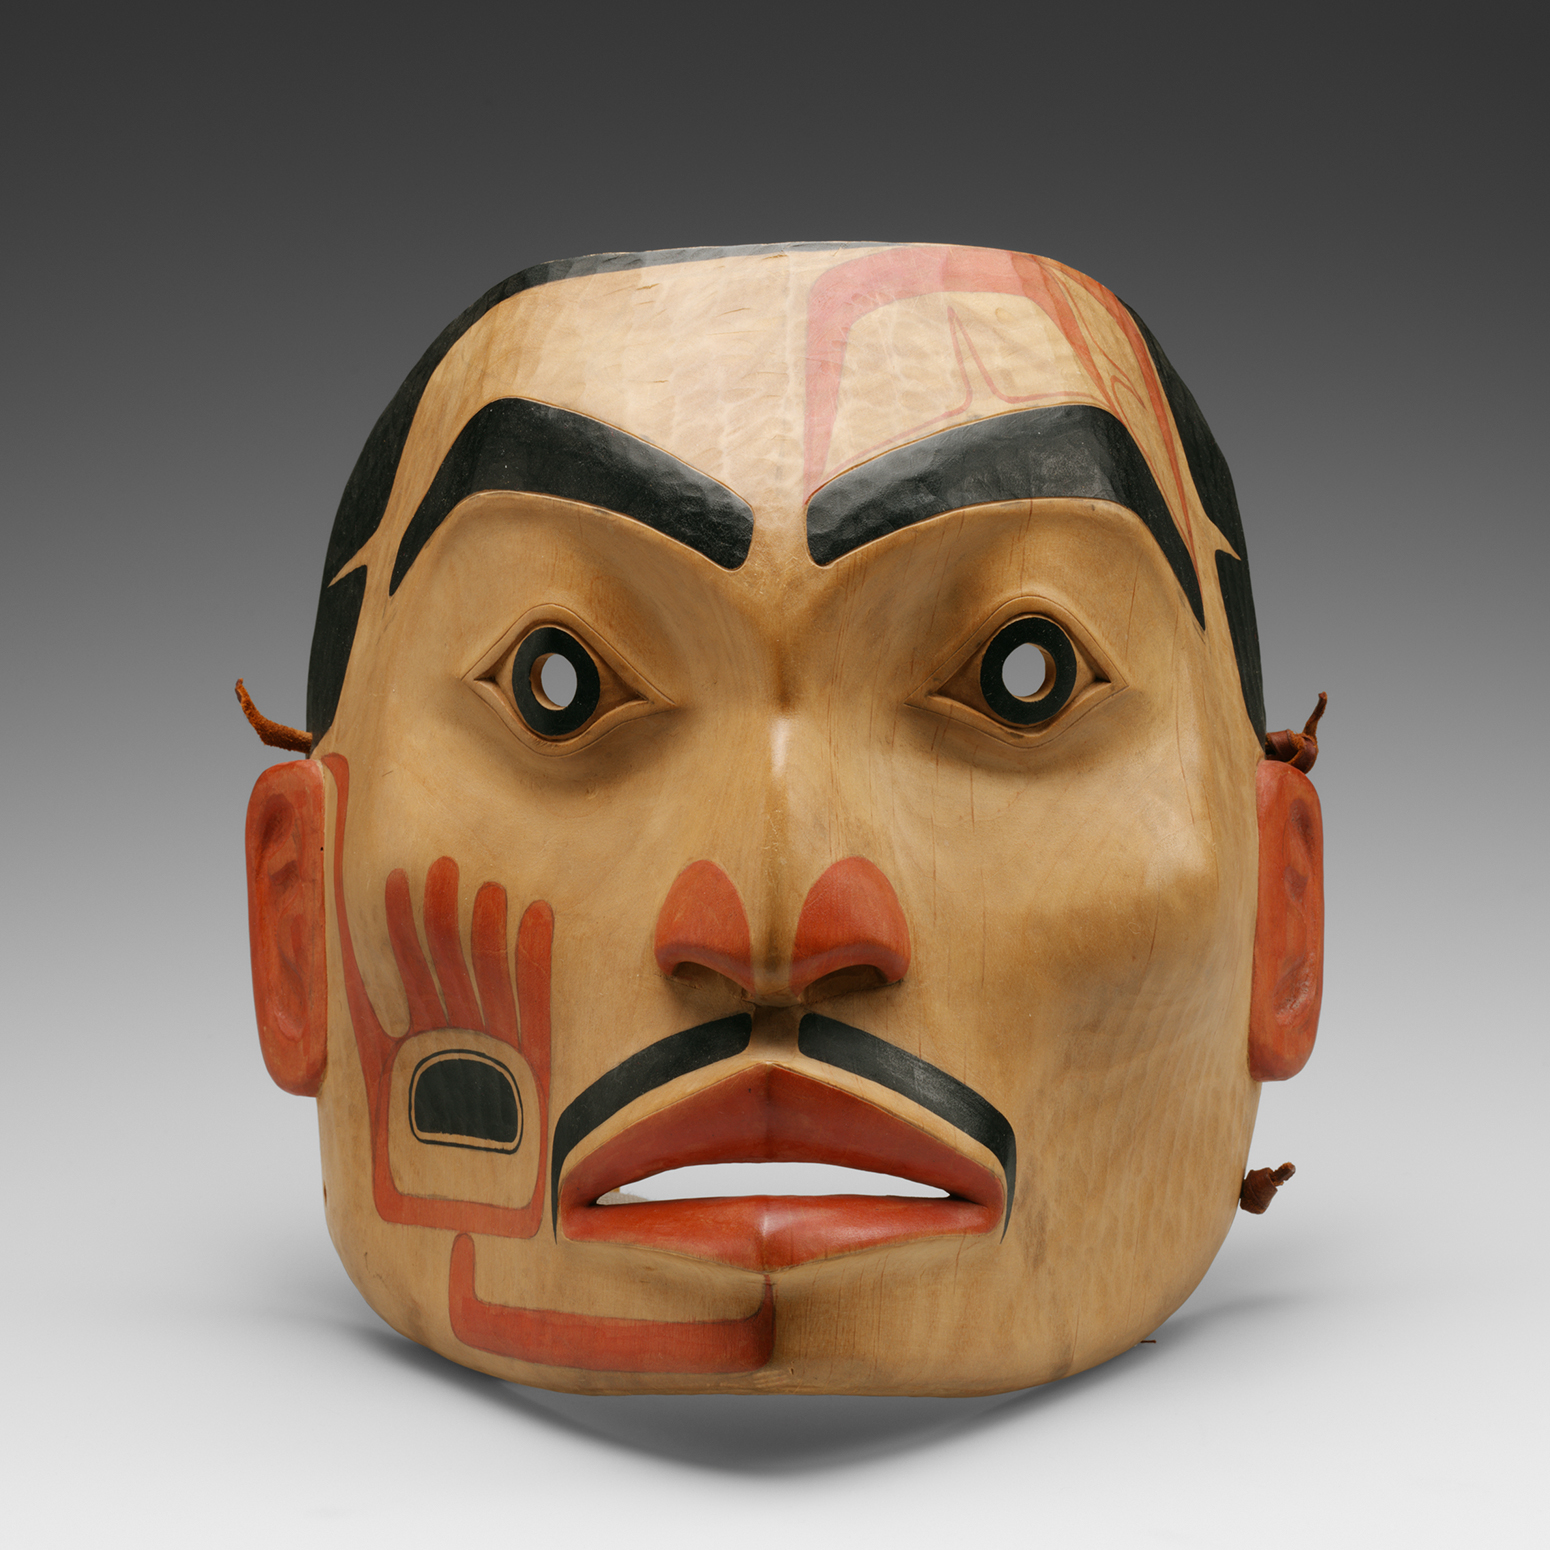 A wood mask painted to look like a human face with dark eyebrows and mustache